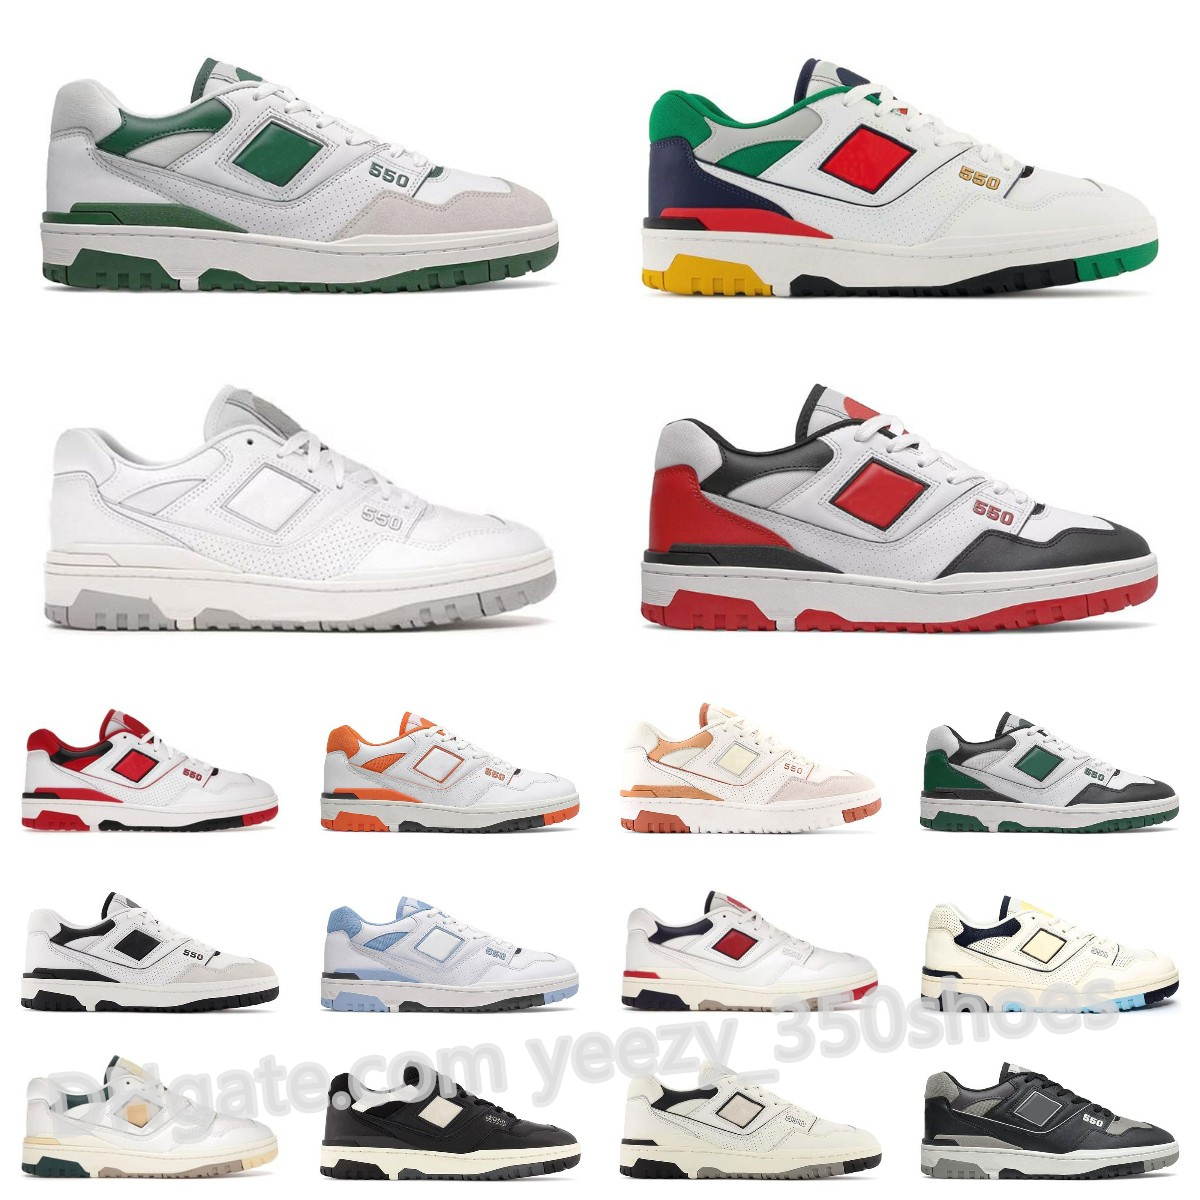 

2023 Designer BB550 B550 550 Sneakers Mens Running Shoes Low Sports Athletic Boots Shadow White Green Red Sea Salt Varsity Gold Navy Blue Men Women casual Trainers, Box